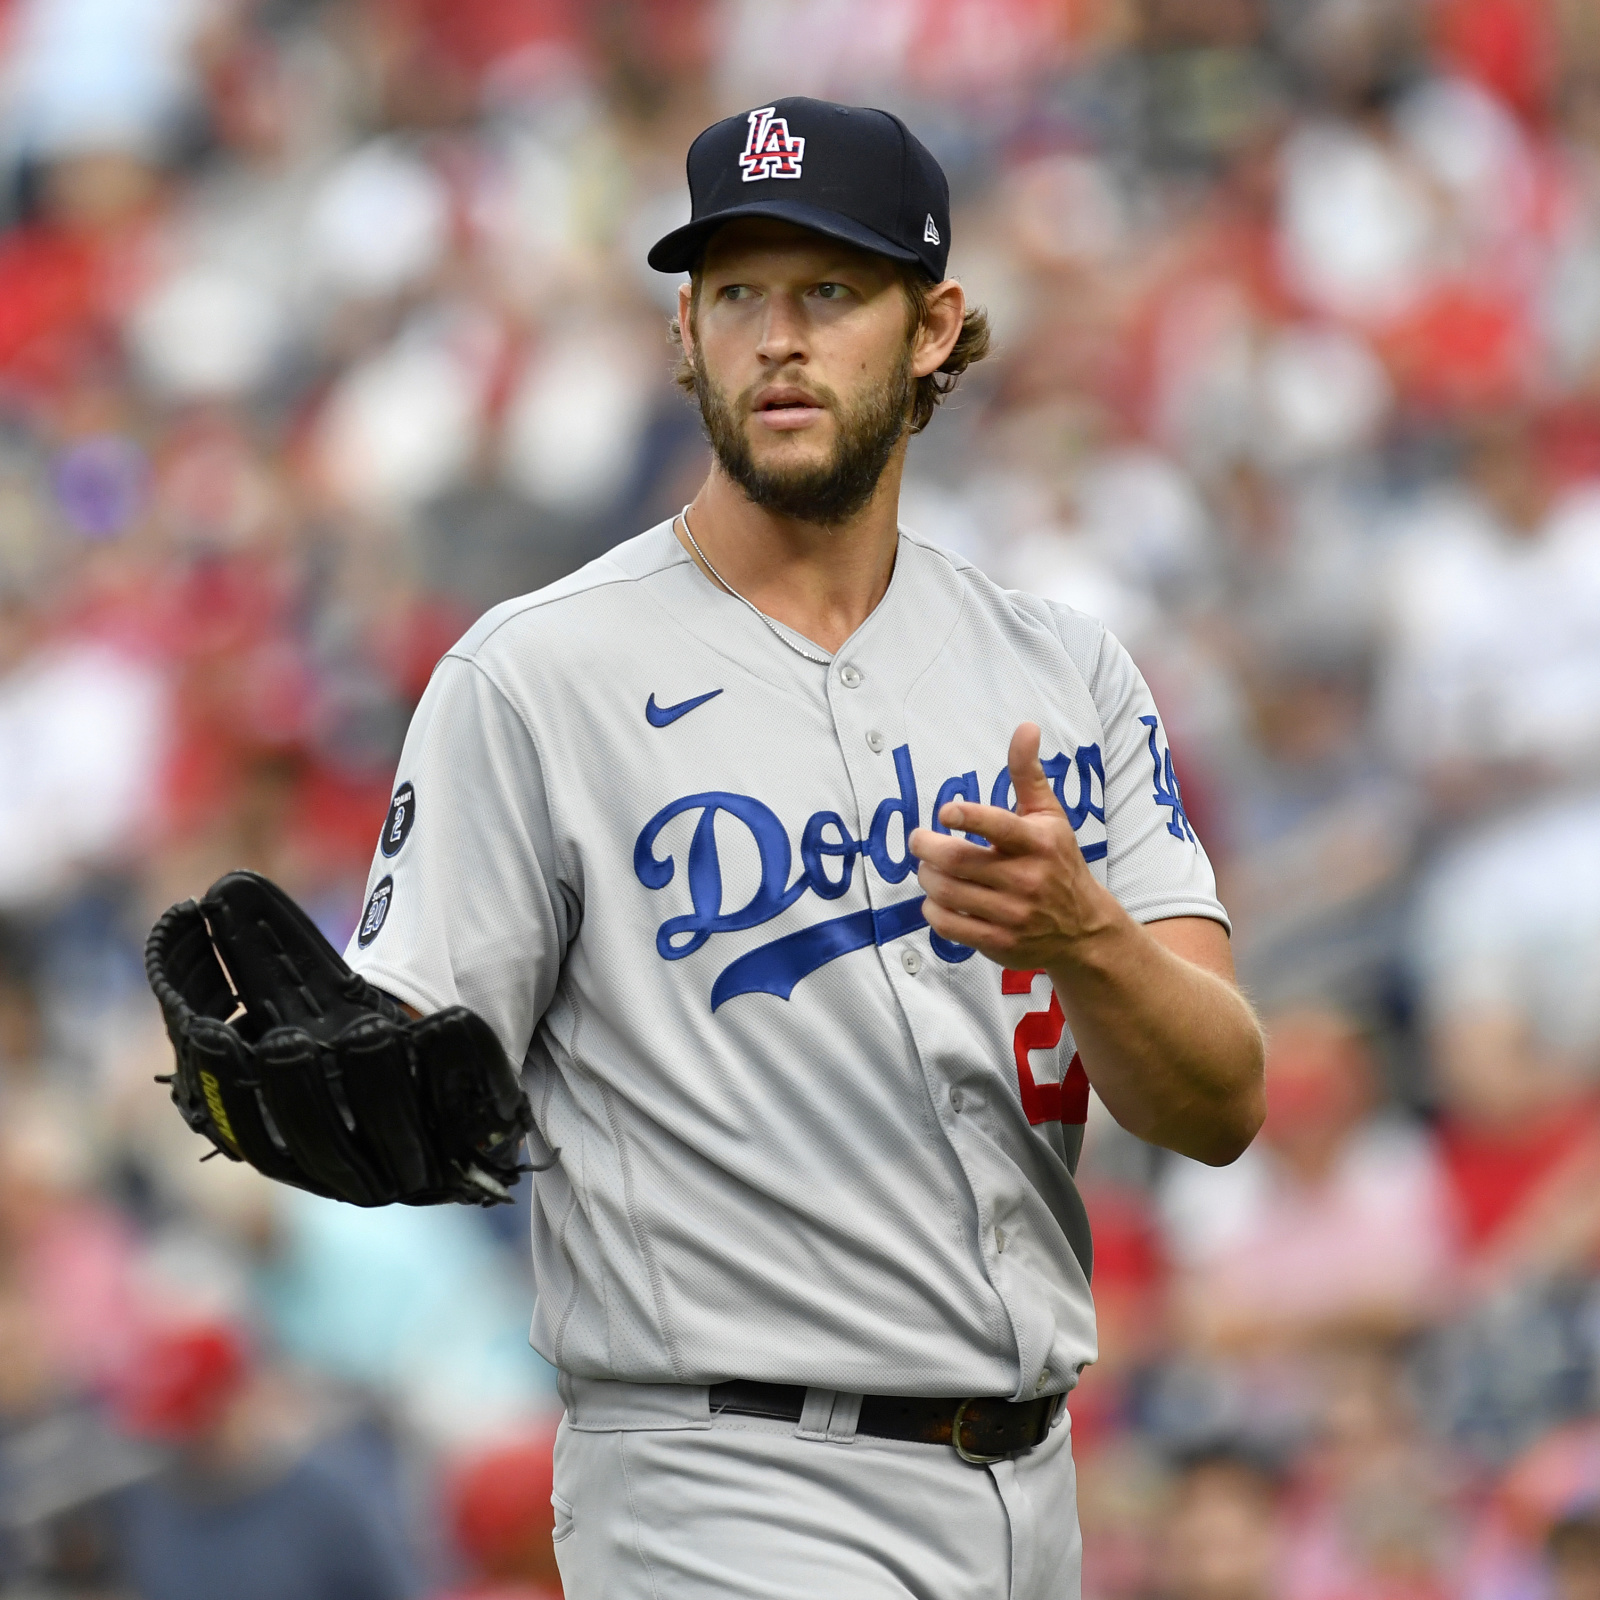 Dodgers Re-sign LHP Clayton Kershaw to 1-year Deal